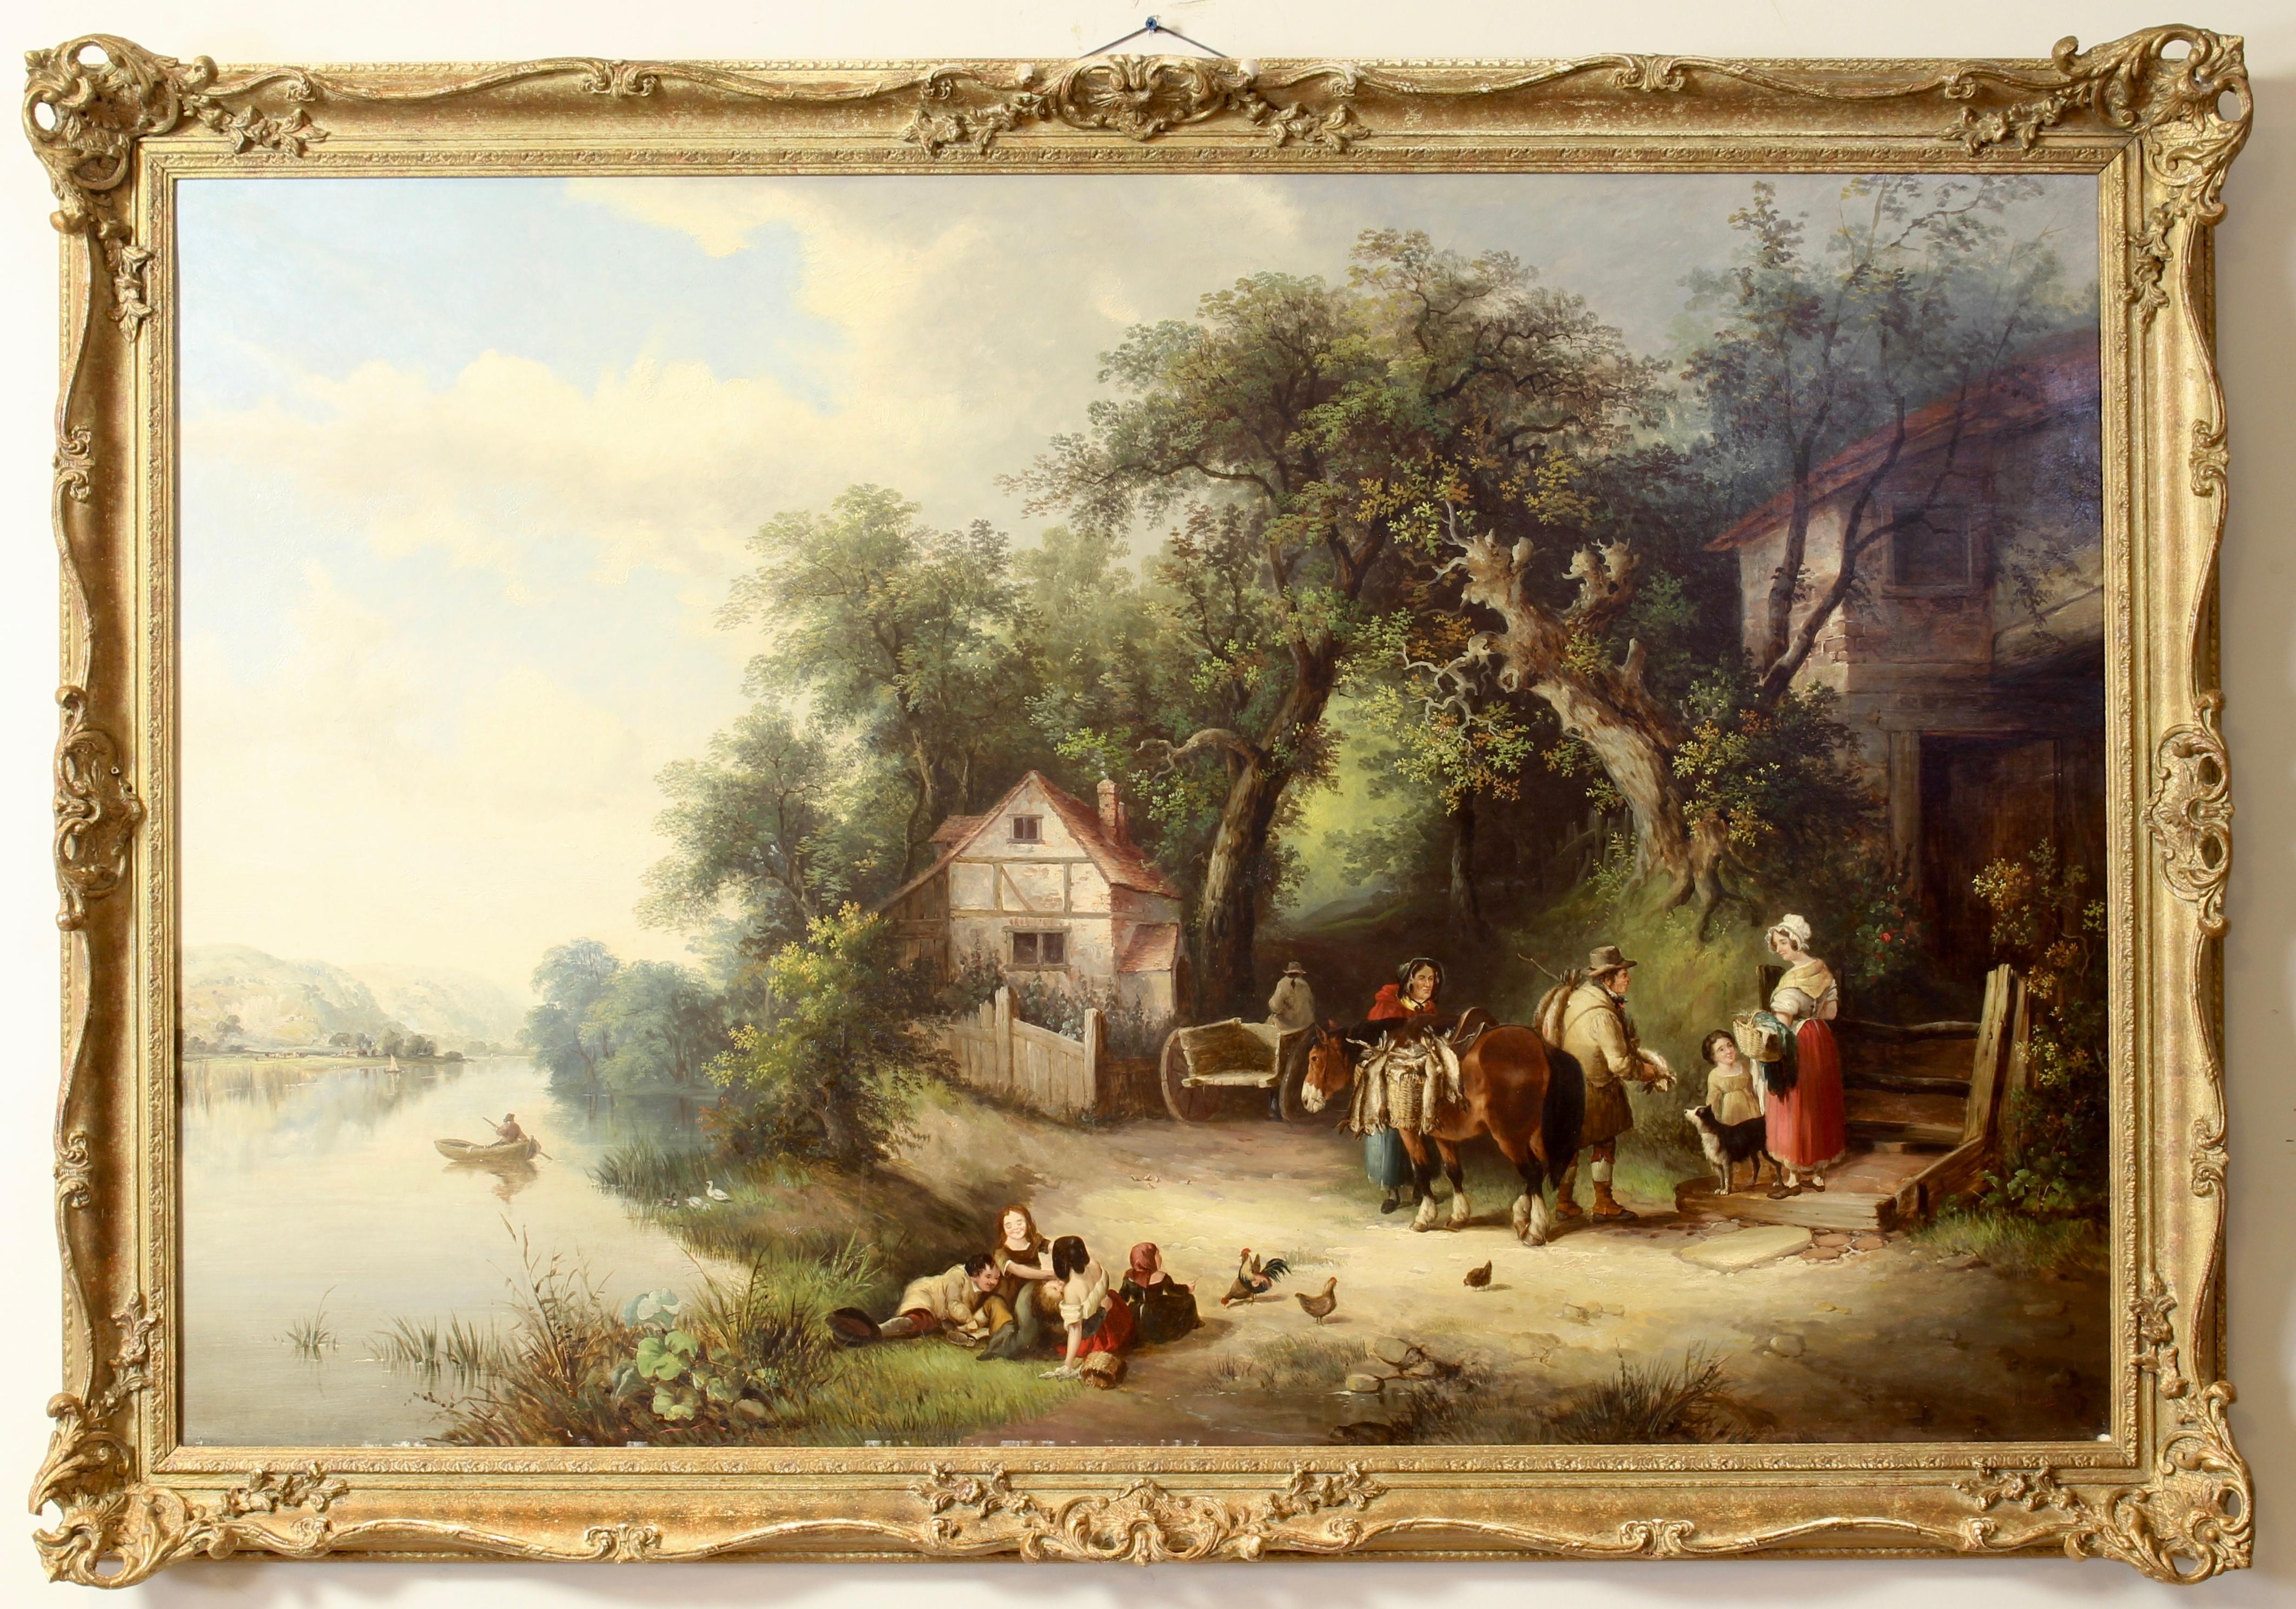 A large and impressive mid-19th century. oil-on-canvas landscape painting depicting a peddler selling his wares in a country setting. In later carved giltwood frame. Signed lower right, 